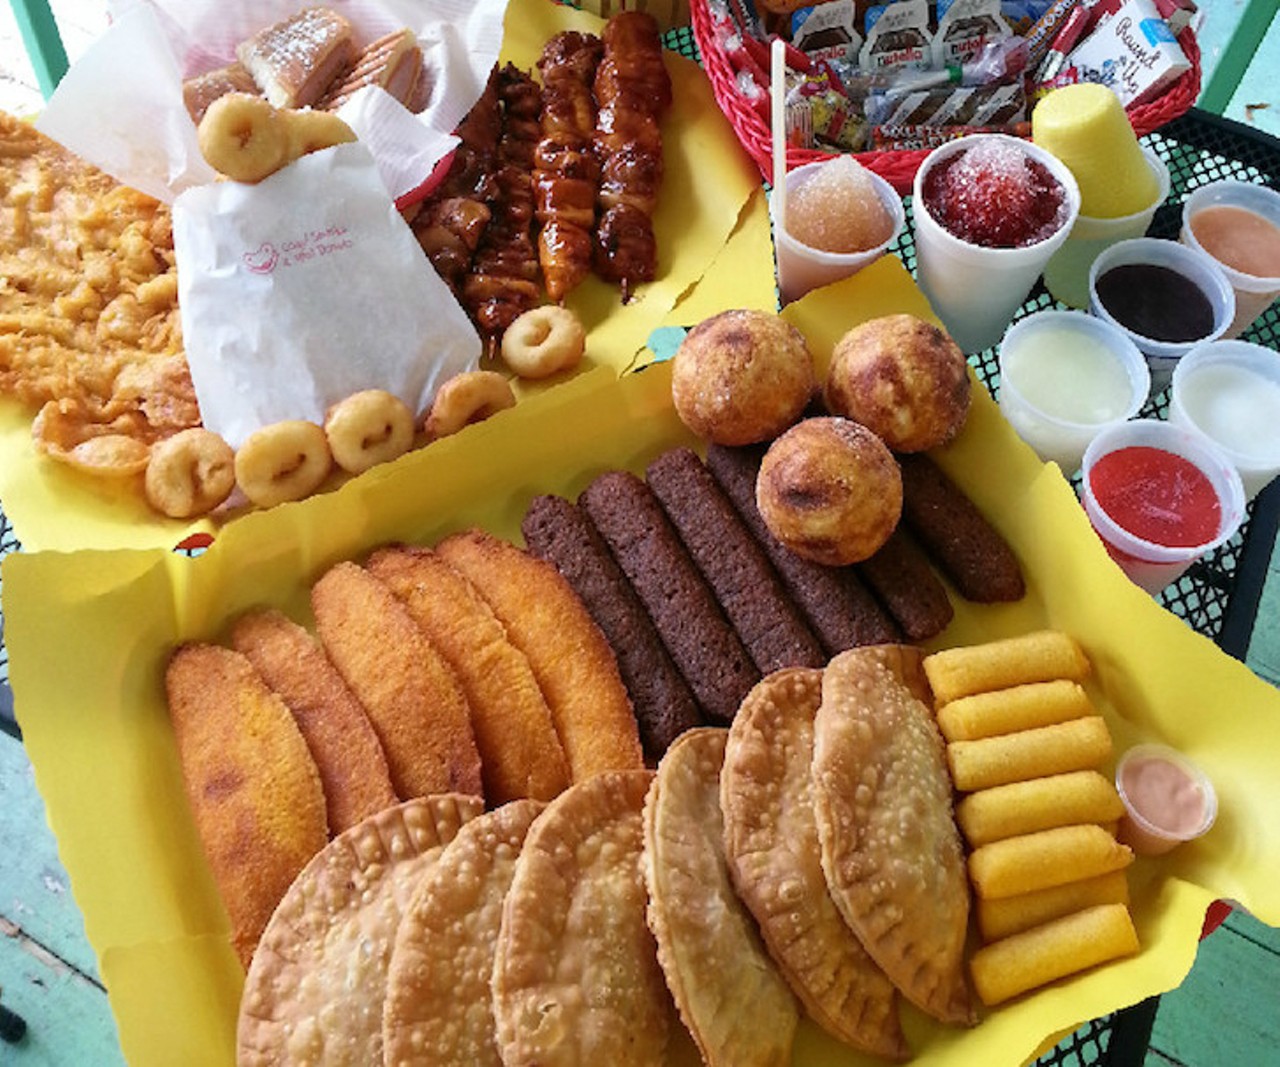 Coqui Snacks  
3018 Lions Court, Kissimmee, 407-846-4126
This pint-sized Puerto Rican restaurant specializes in empanadas, taquitos and mini donuts. Stop by on a Saturday for a special serving of pinchos with tostones. 
Photo via Coqui Snacks